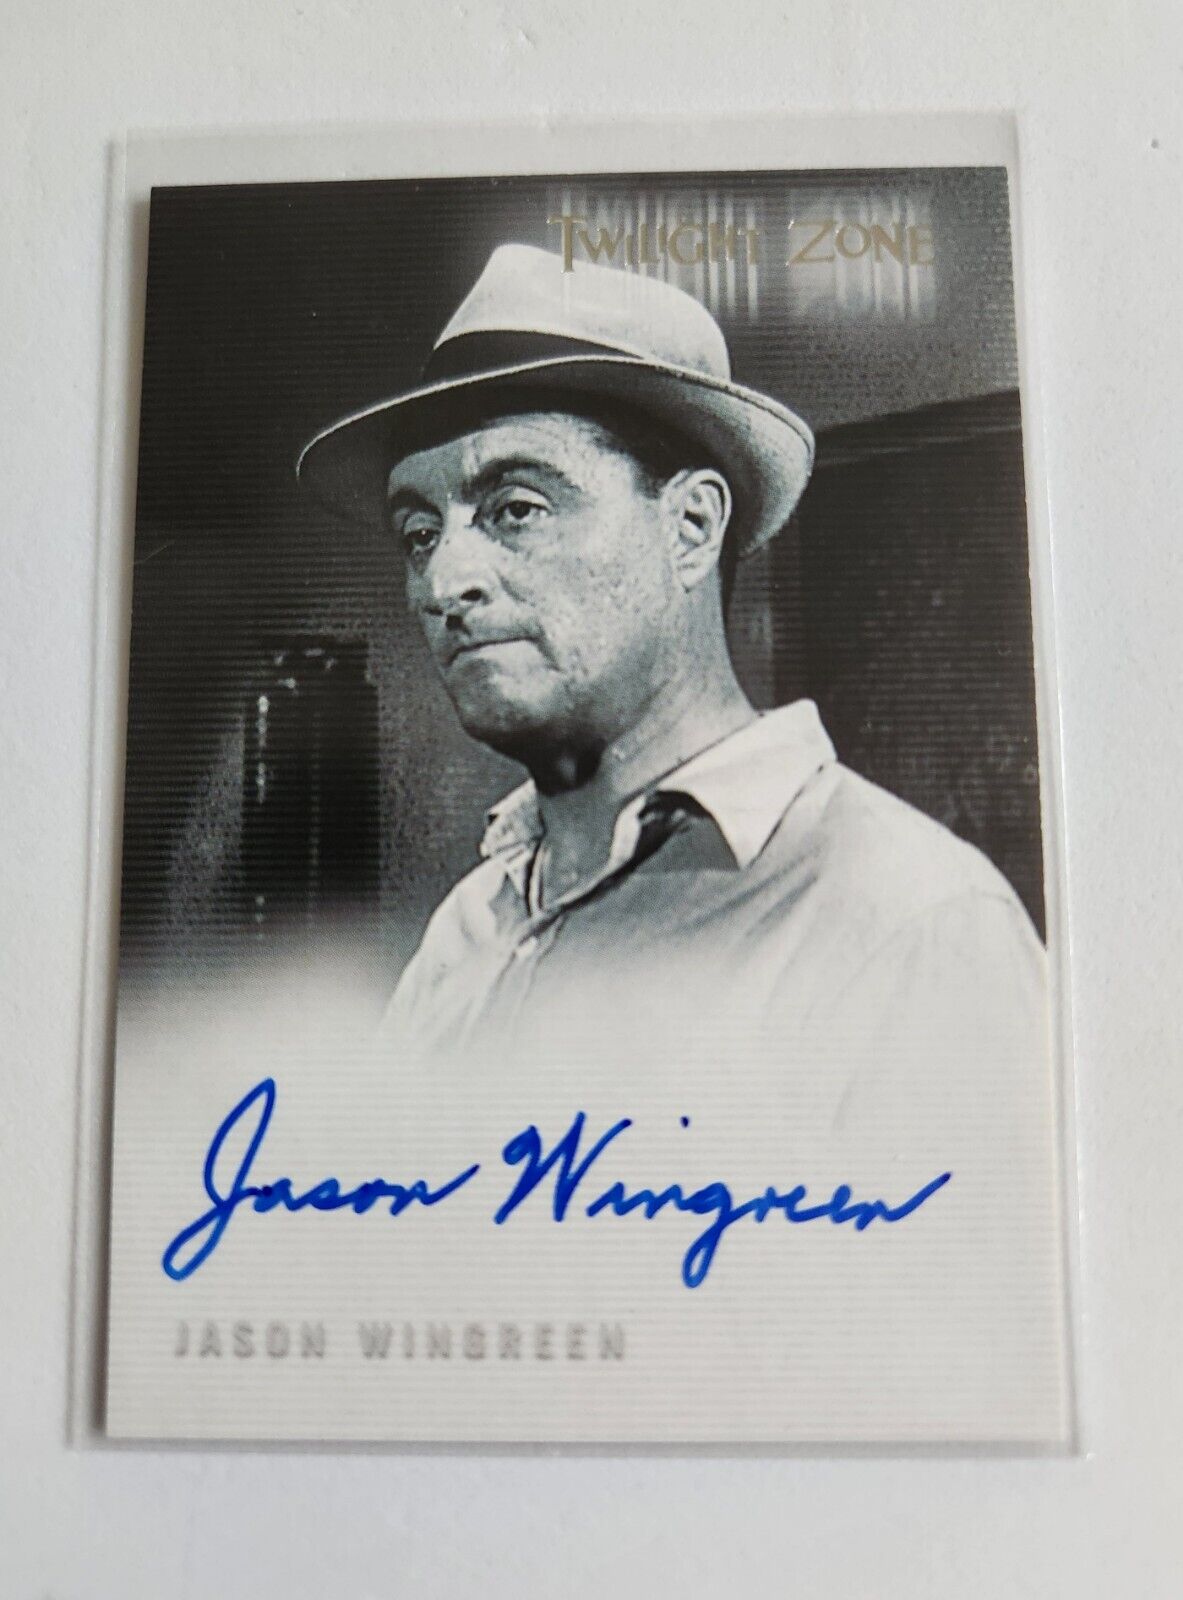 Twilight Zone - Series 4 Jason Wingreen Card #  A-76 Autographed